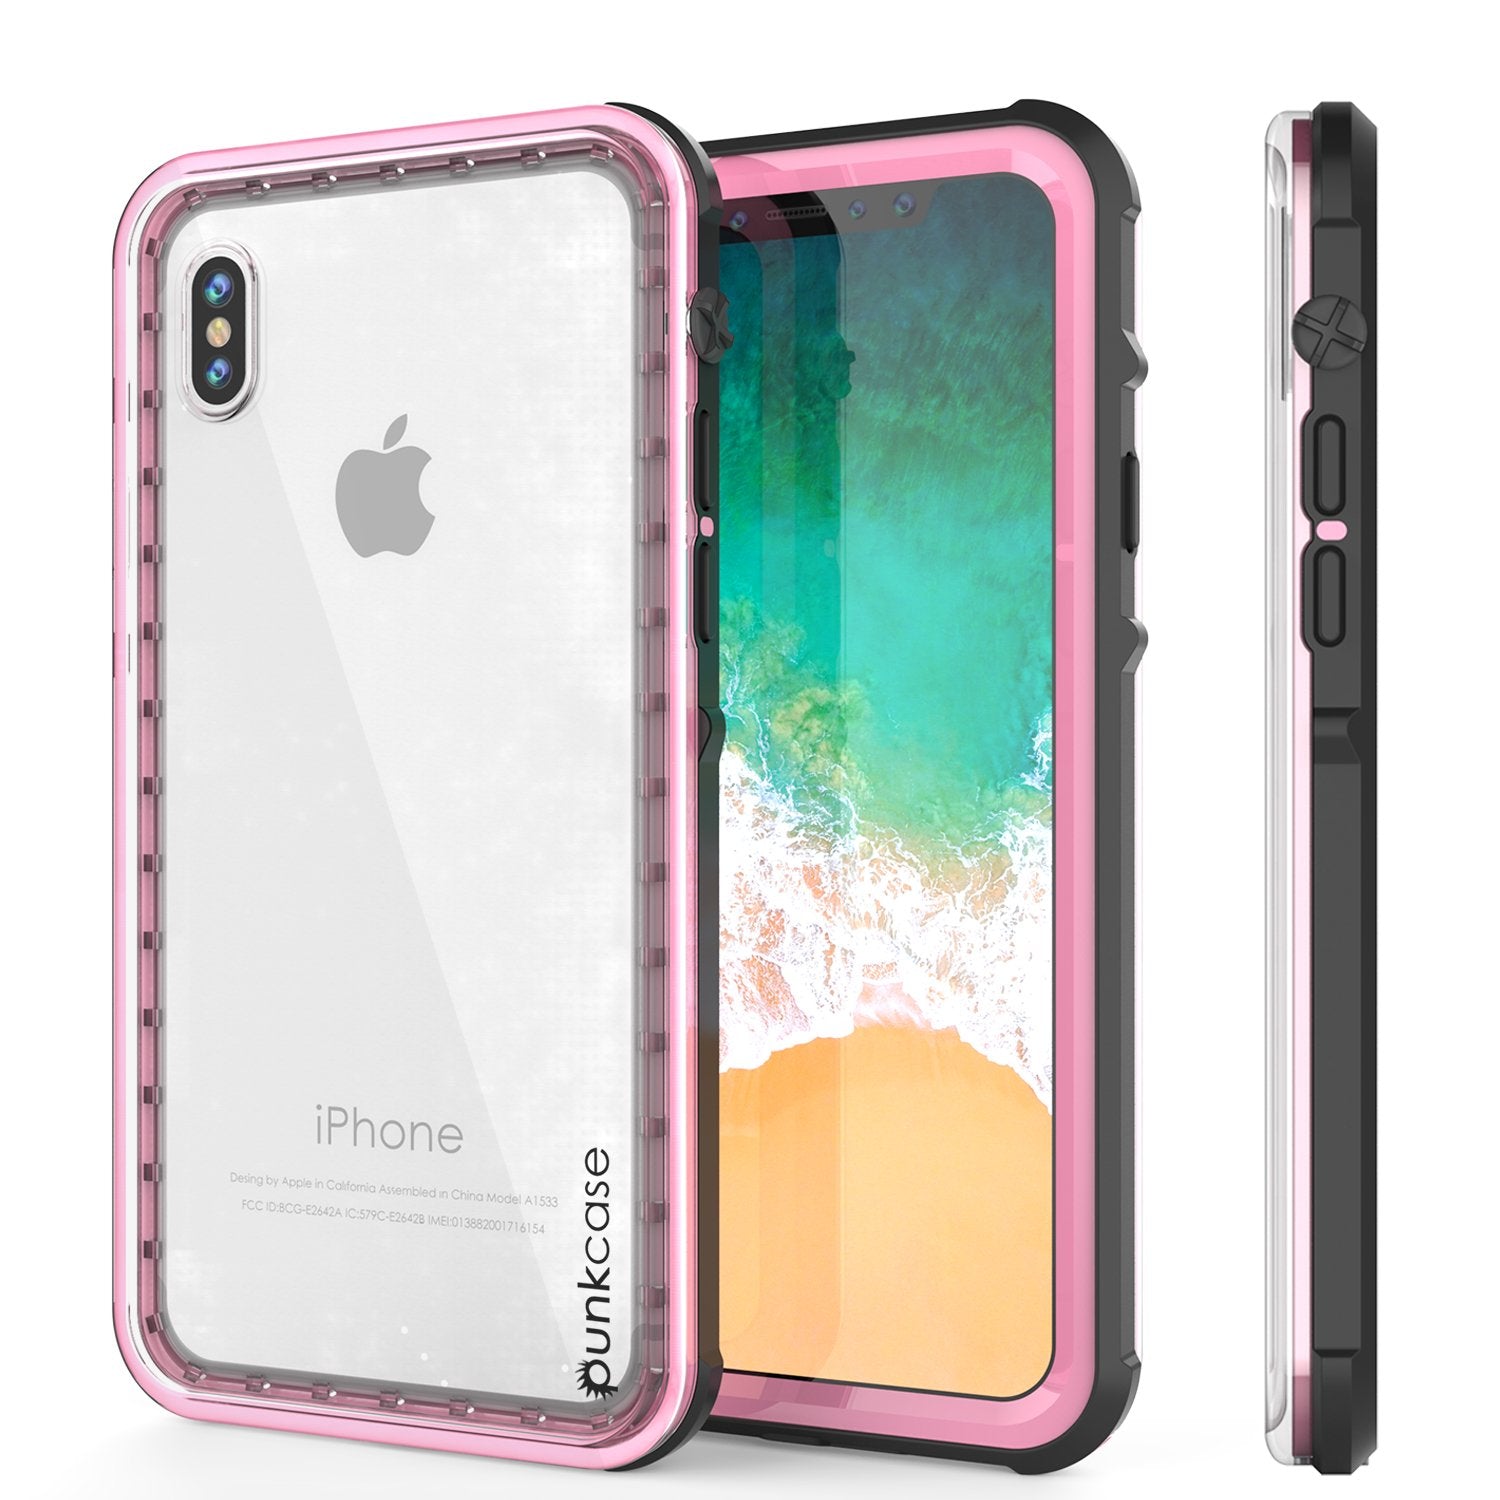 iPhone X Case, PUNKCase [CRYSTAL SERIES] Protective IP68 Certified Cover [Pink]